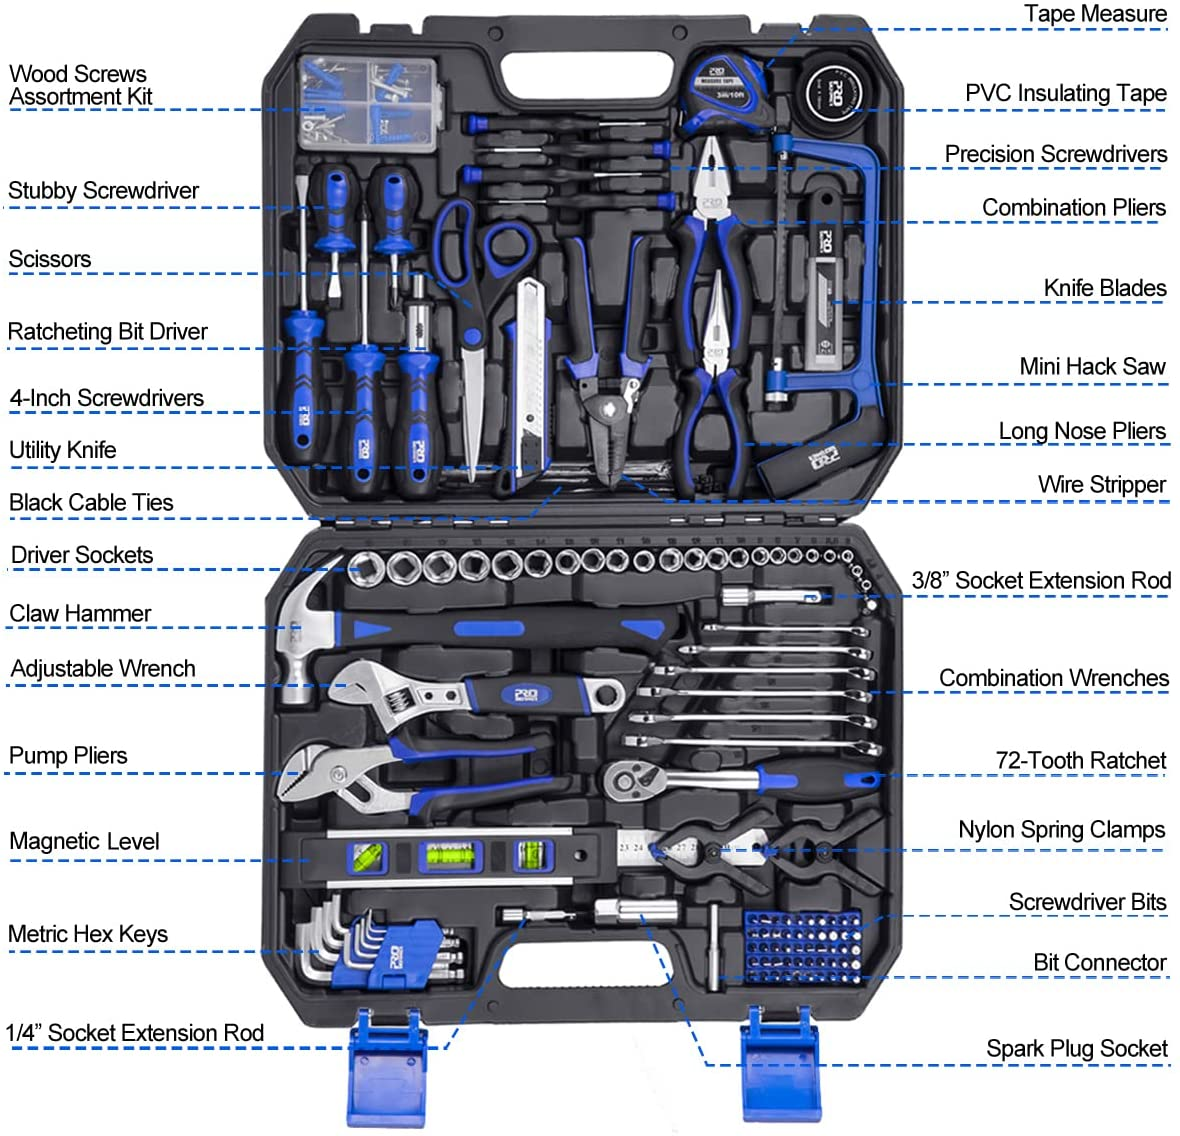 210-Piece Household Tool Kit,  General Home/Auto Repair Tool Set with Hammer, Pliers, Screwdriver Set, Wrench Socket Kit and Toolbox Storage Case - Perfect for Homeowner, Diyer, Handyman